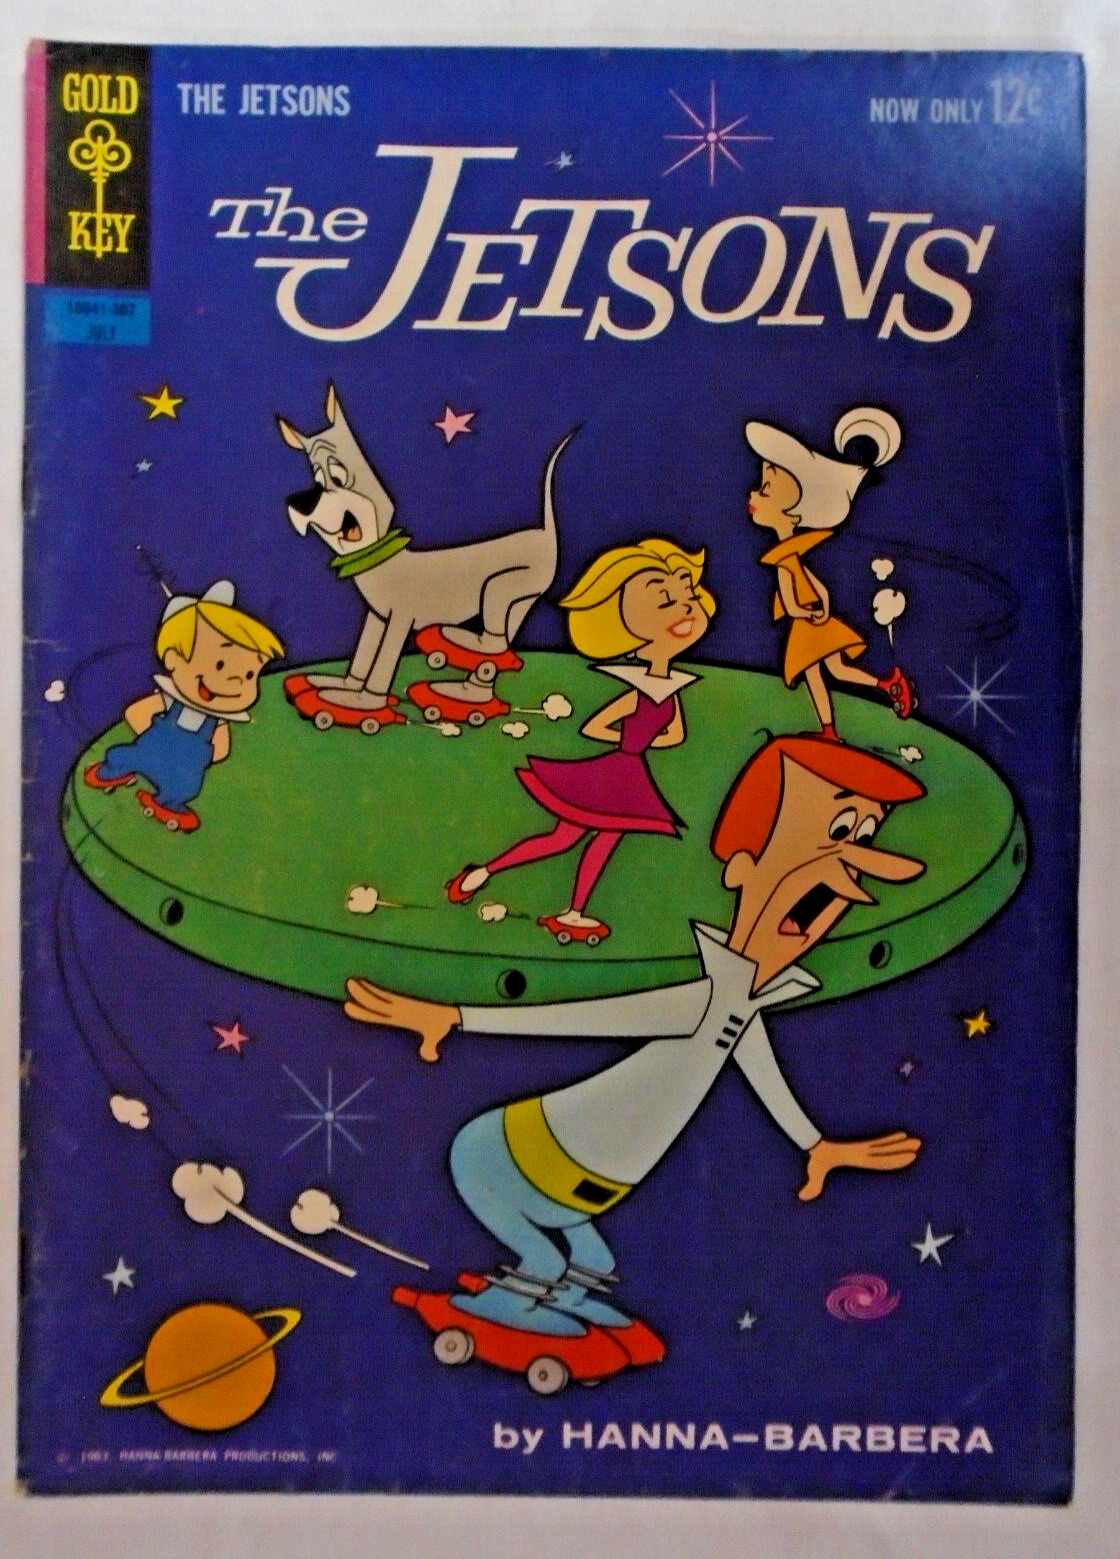 *Jetsons v1 (1963) #4-6; 3 Book lot 2023-24 Overstreet Guide Price $50